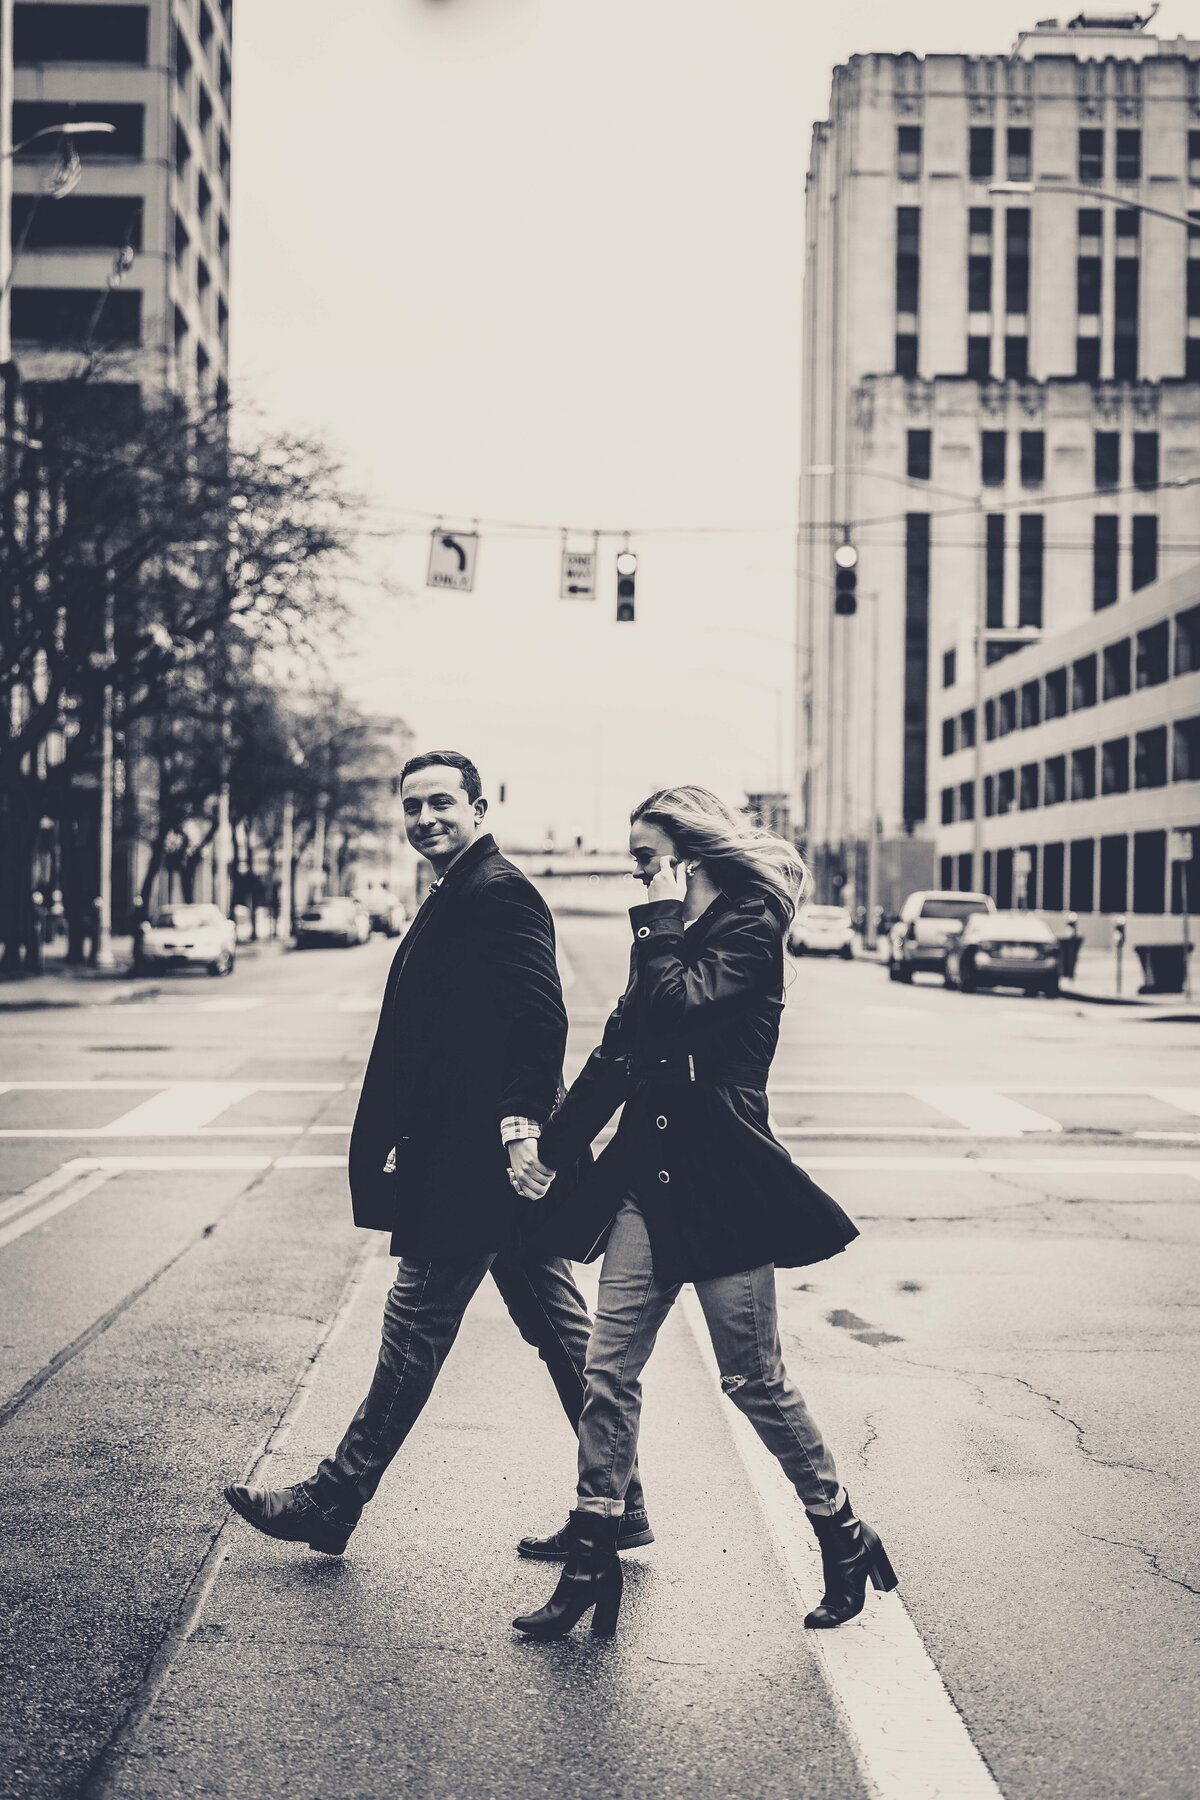 Step into the timeless charm of Justine and Jack's engagement shoot captured in striking black and white as they walk hand-in-hand across a bustling downtown Dayton street. This classic photograph not only symbolizes their journey together but also embraces the cinematic quality of urban life. The simplicity of the black and white filter enhances the emotional connection between the couple, making this a captivating snapshot of their love set against the backdrop of city life. Ideal for couples inspired by the elegance of vintage photography and the dynamic energy of urban settings.